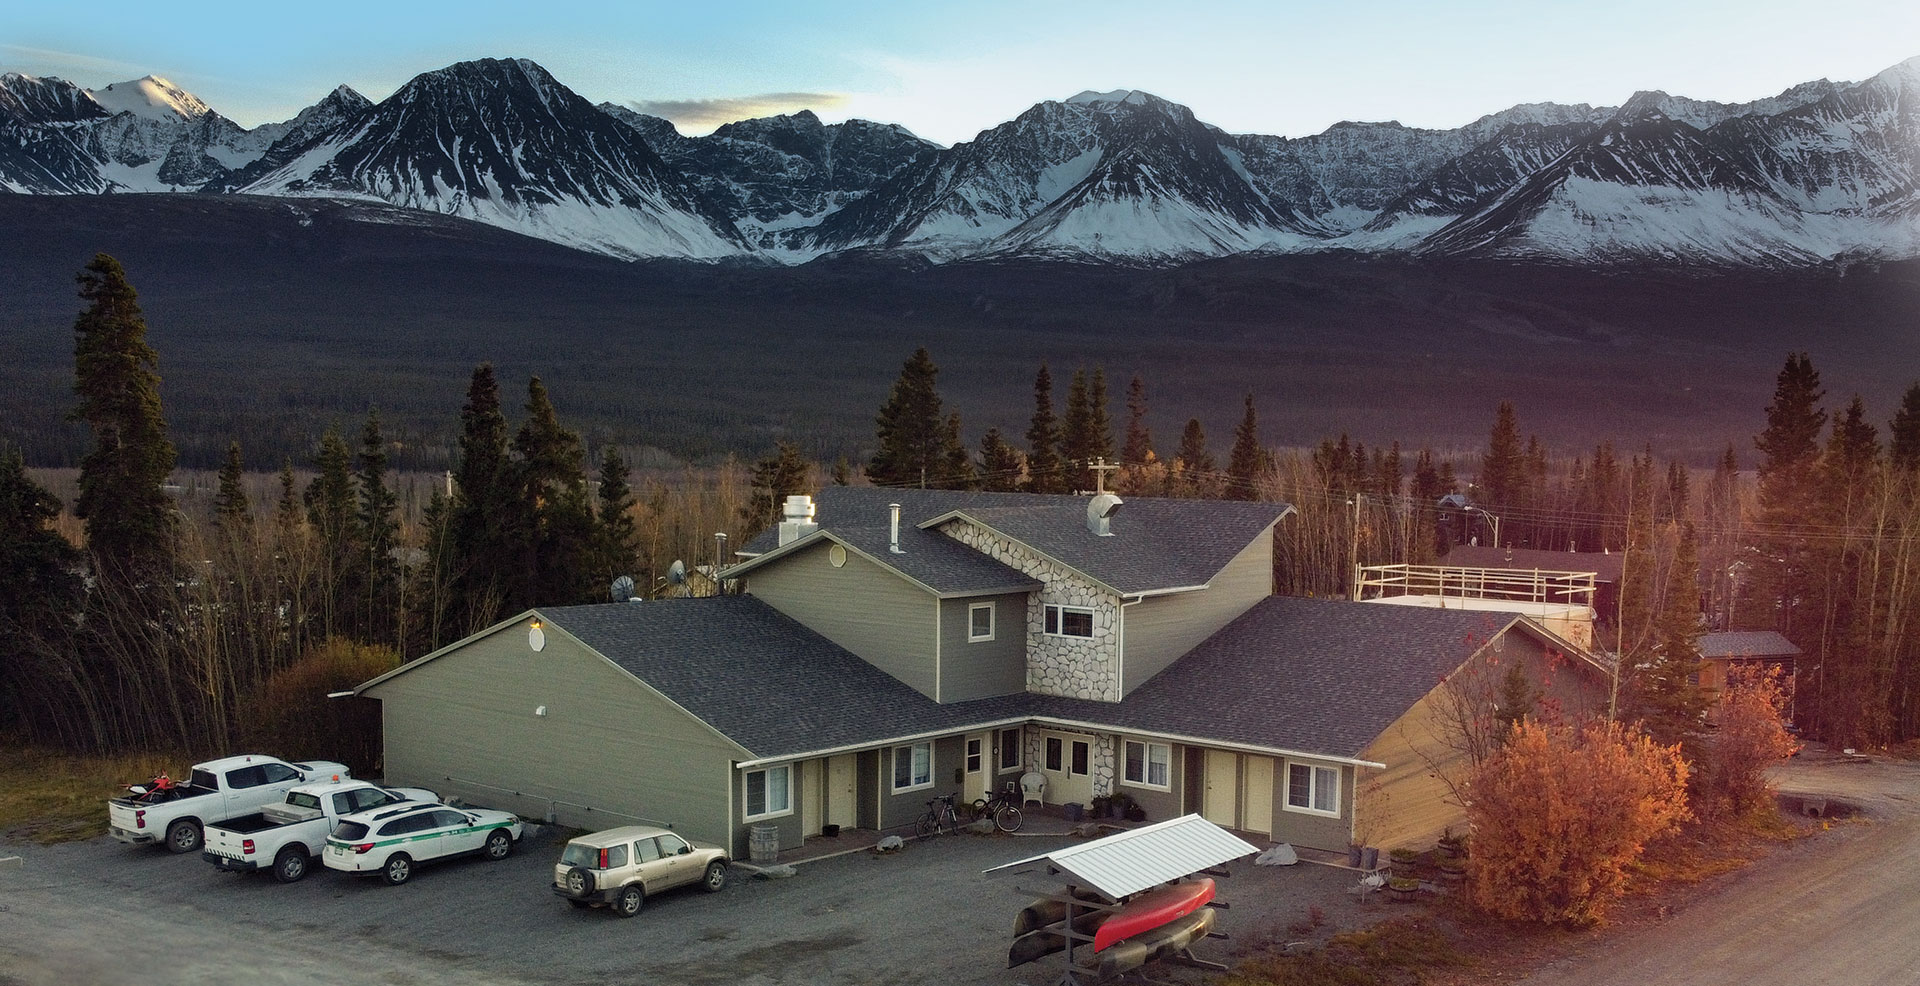 Haines Junction Hotel and Accommodations